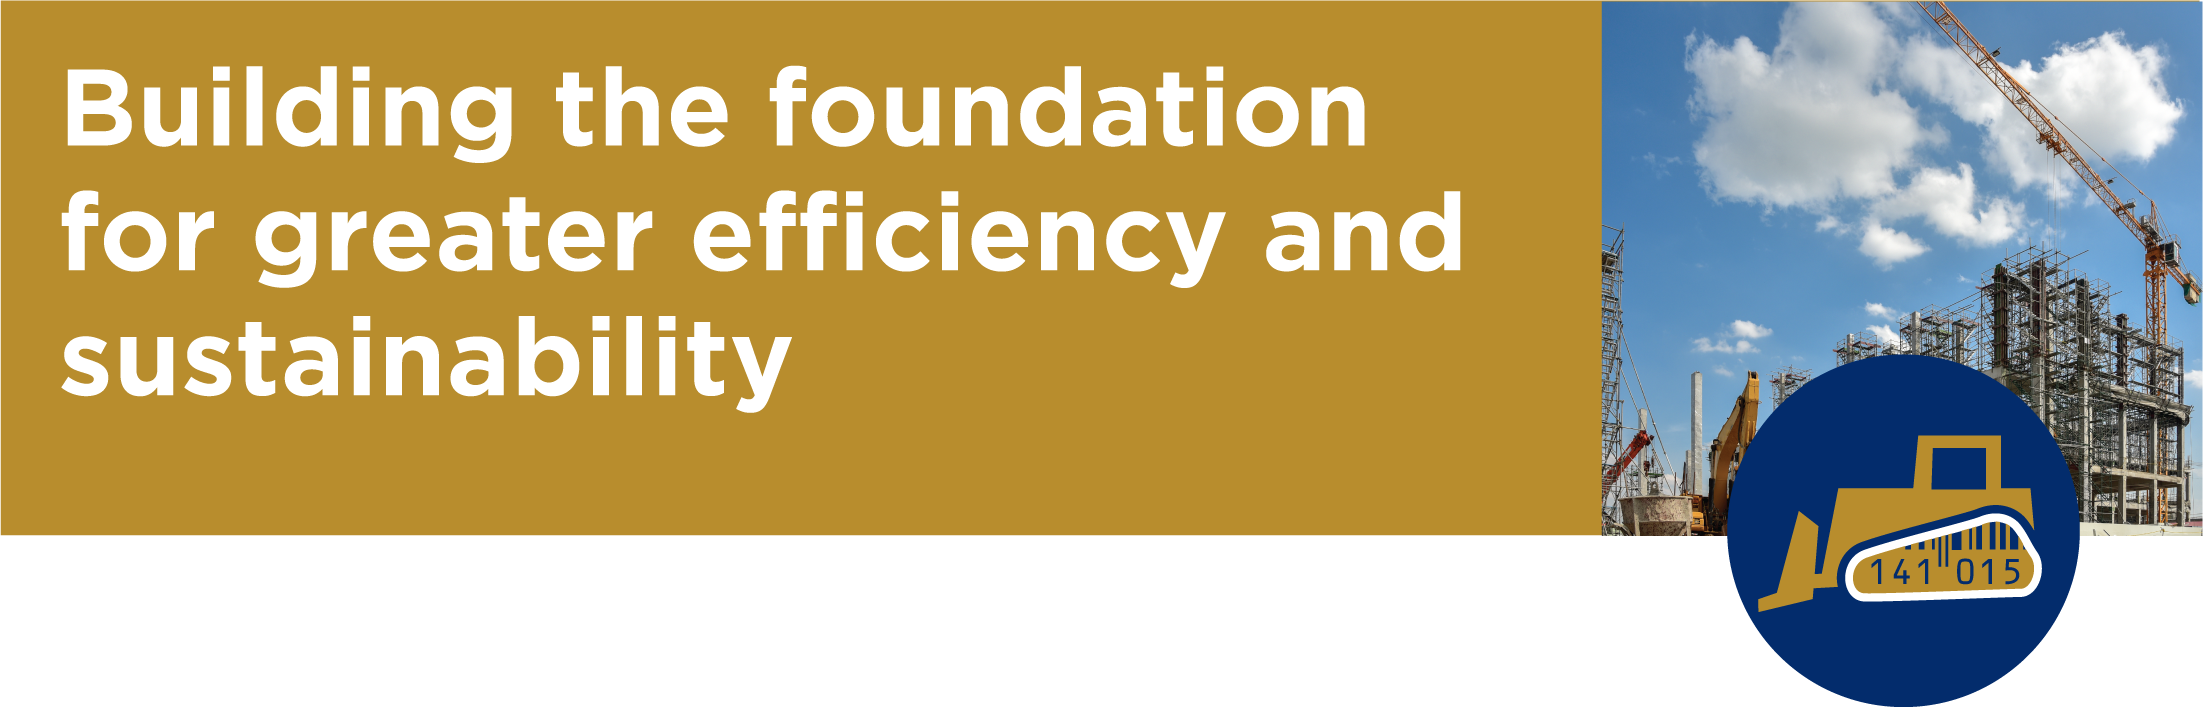 Building the foundation for greater efficiency andsustainability